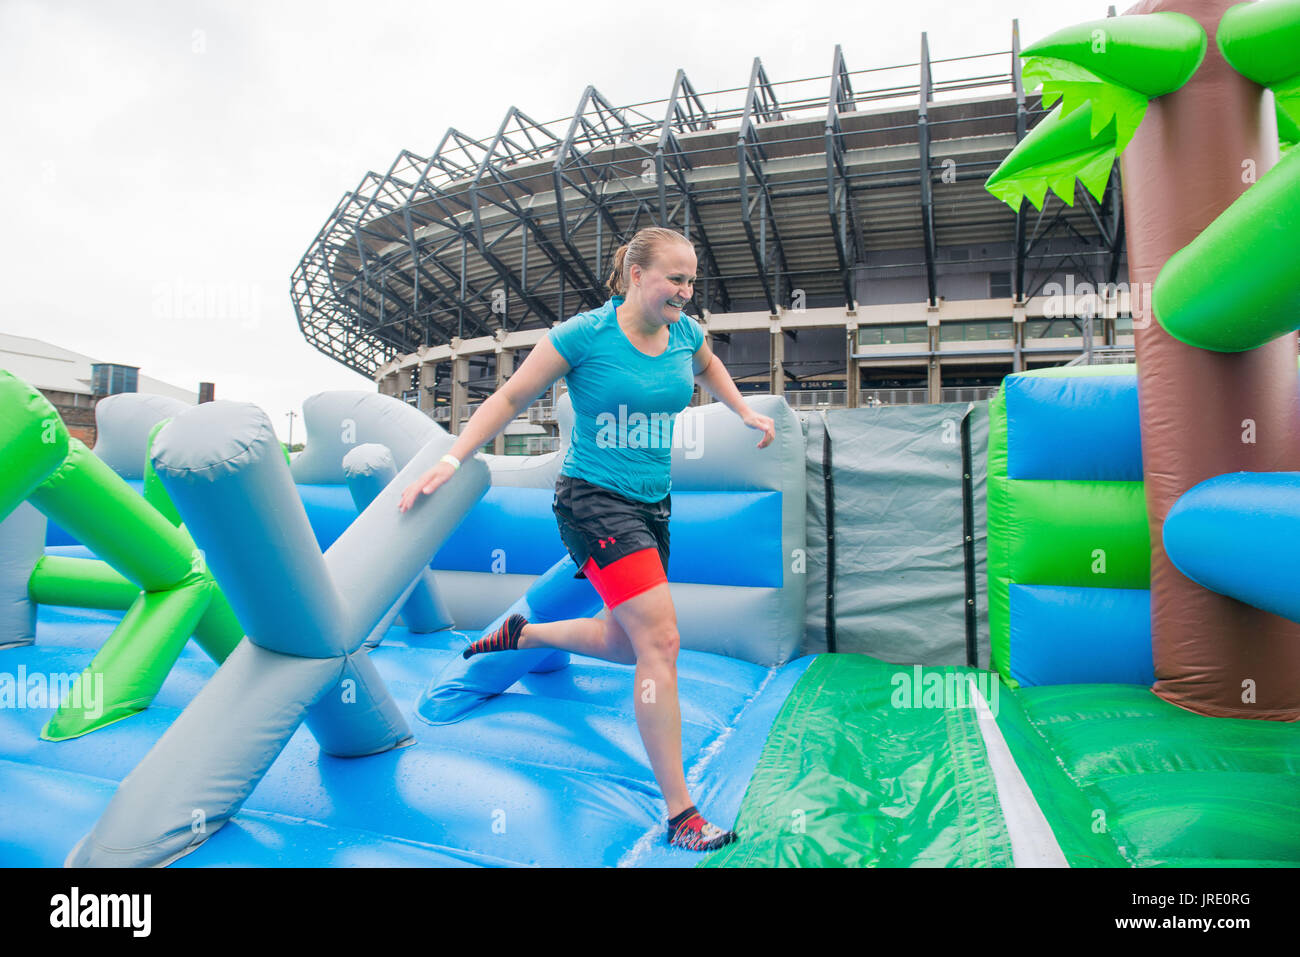 Labyrinth, world's largest inflatable obstacle course, Murrayfield Nicola Trainer Stock Photo